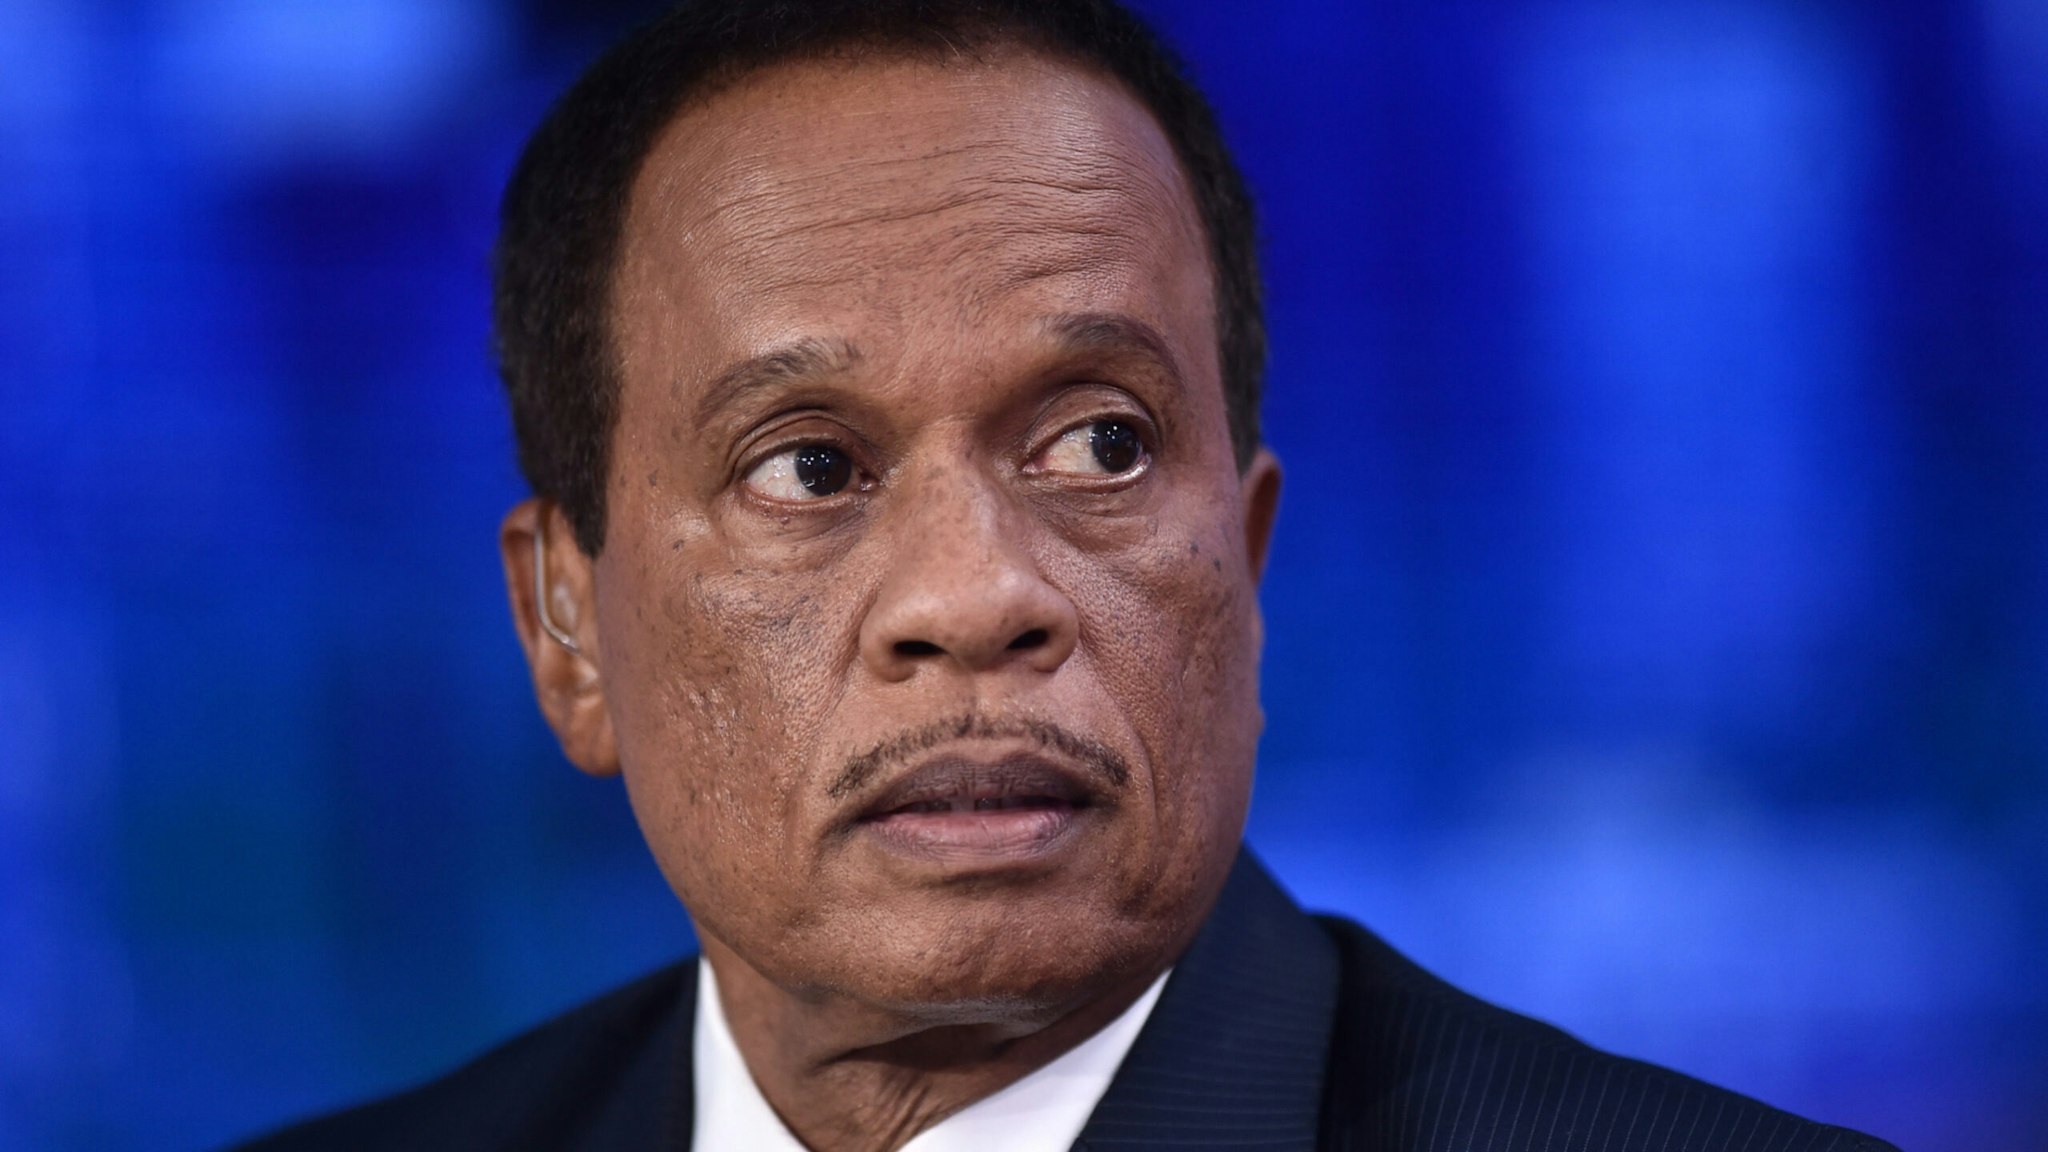 FOX News Contributor Juan Williams visits "The Story with Martha MacCallum" in the Fox News Channel Studios on September 17, 2019 in New York City.